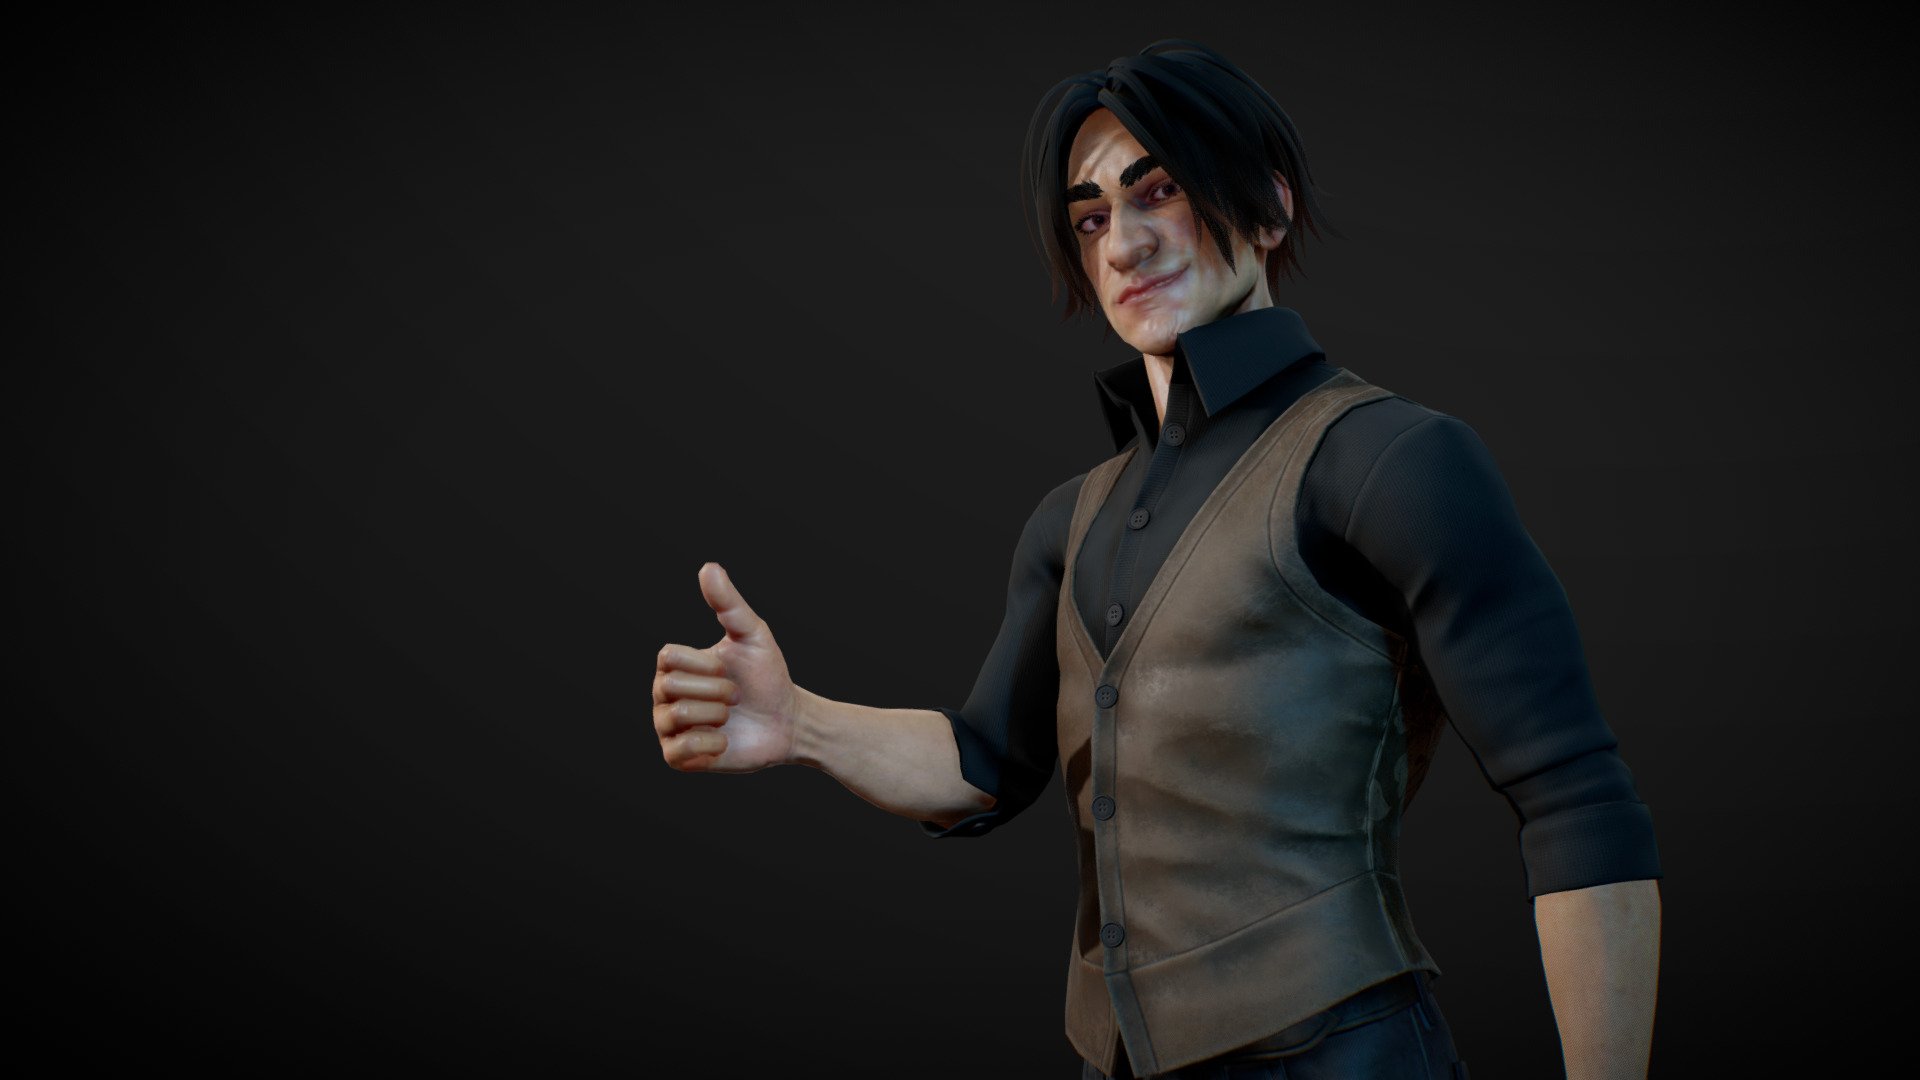 Personal project

Pixologic Zbrush: Highpoly.
Autodesk Maya: Modeling &amp; retopology, UV unwrapping, rigging &amp; skinning, animation.
Marvelous Designer: Cloth.
Substance Painter: Baking, texturing &amp; painting.
Unreal Engine: Scene, lights &amp; camera setup, hair clothing, render.

Link to real-time captured video in Unreal Engine 4:
https://vimeo.com/662573258

To my parents, the best.
Thank you! - Daniel López Torregrosa - Lowpoly Character - 3D model by DaniLT 3d model